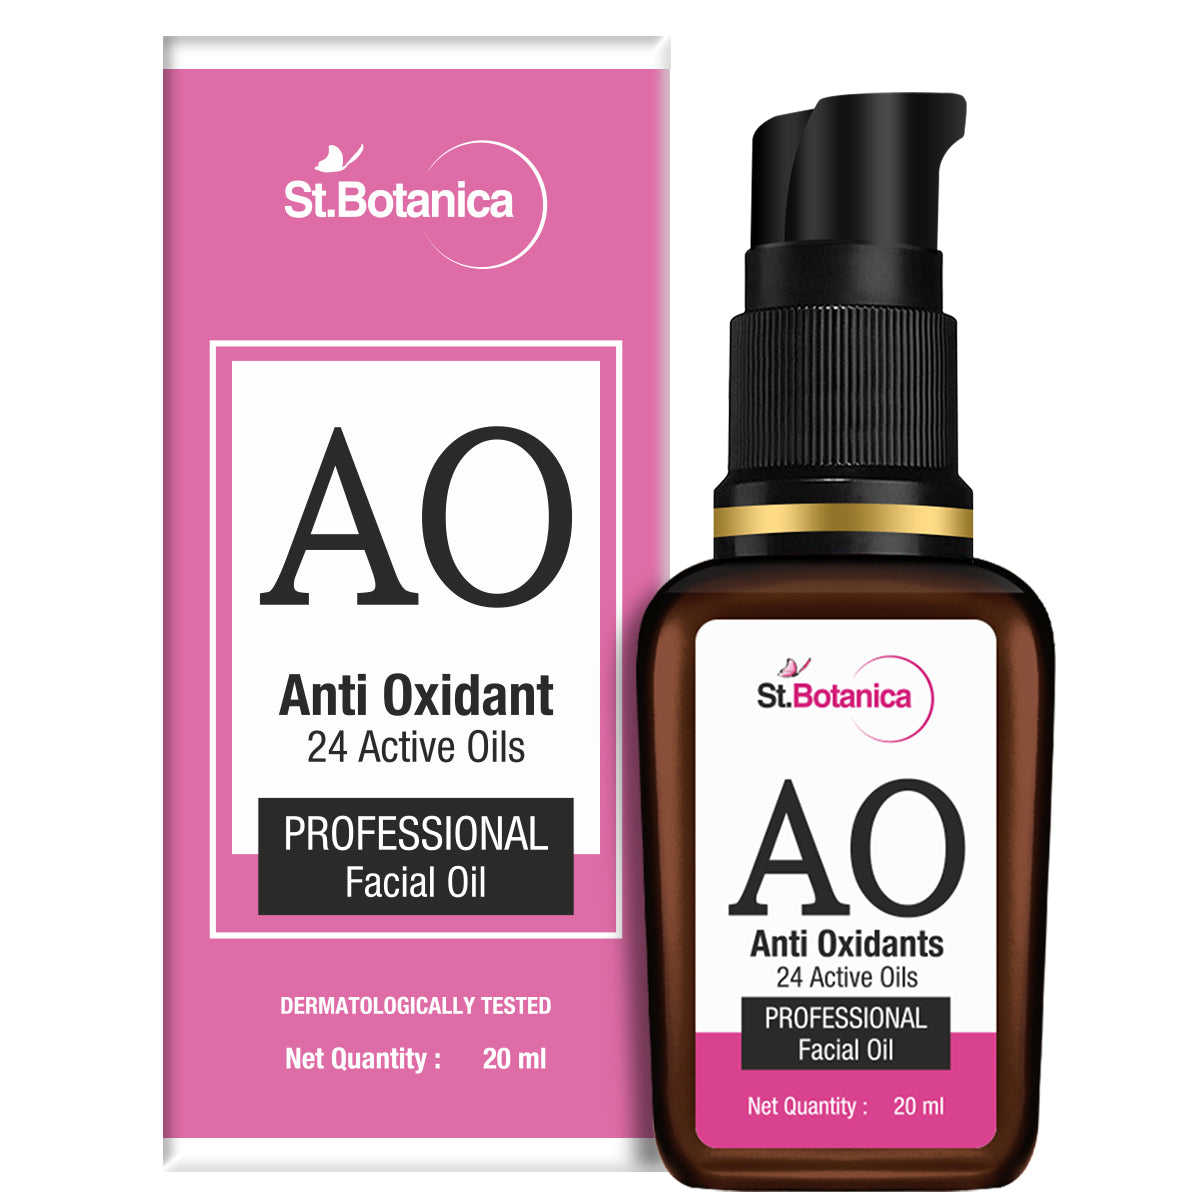 St.Botanica Anti Oxidant (24 Active Oils) Professional Face Oil - For Complete Skin Care, 20 ml